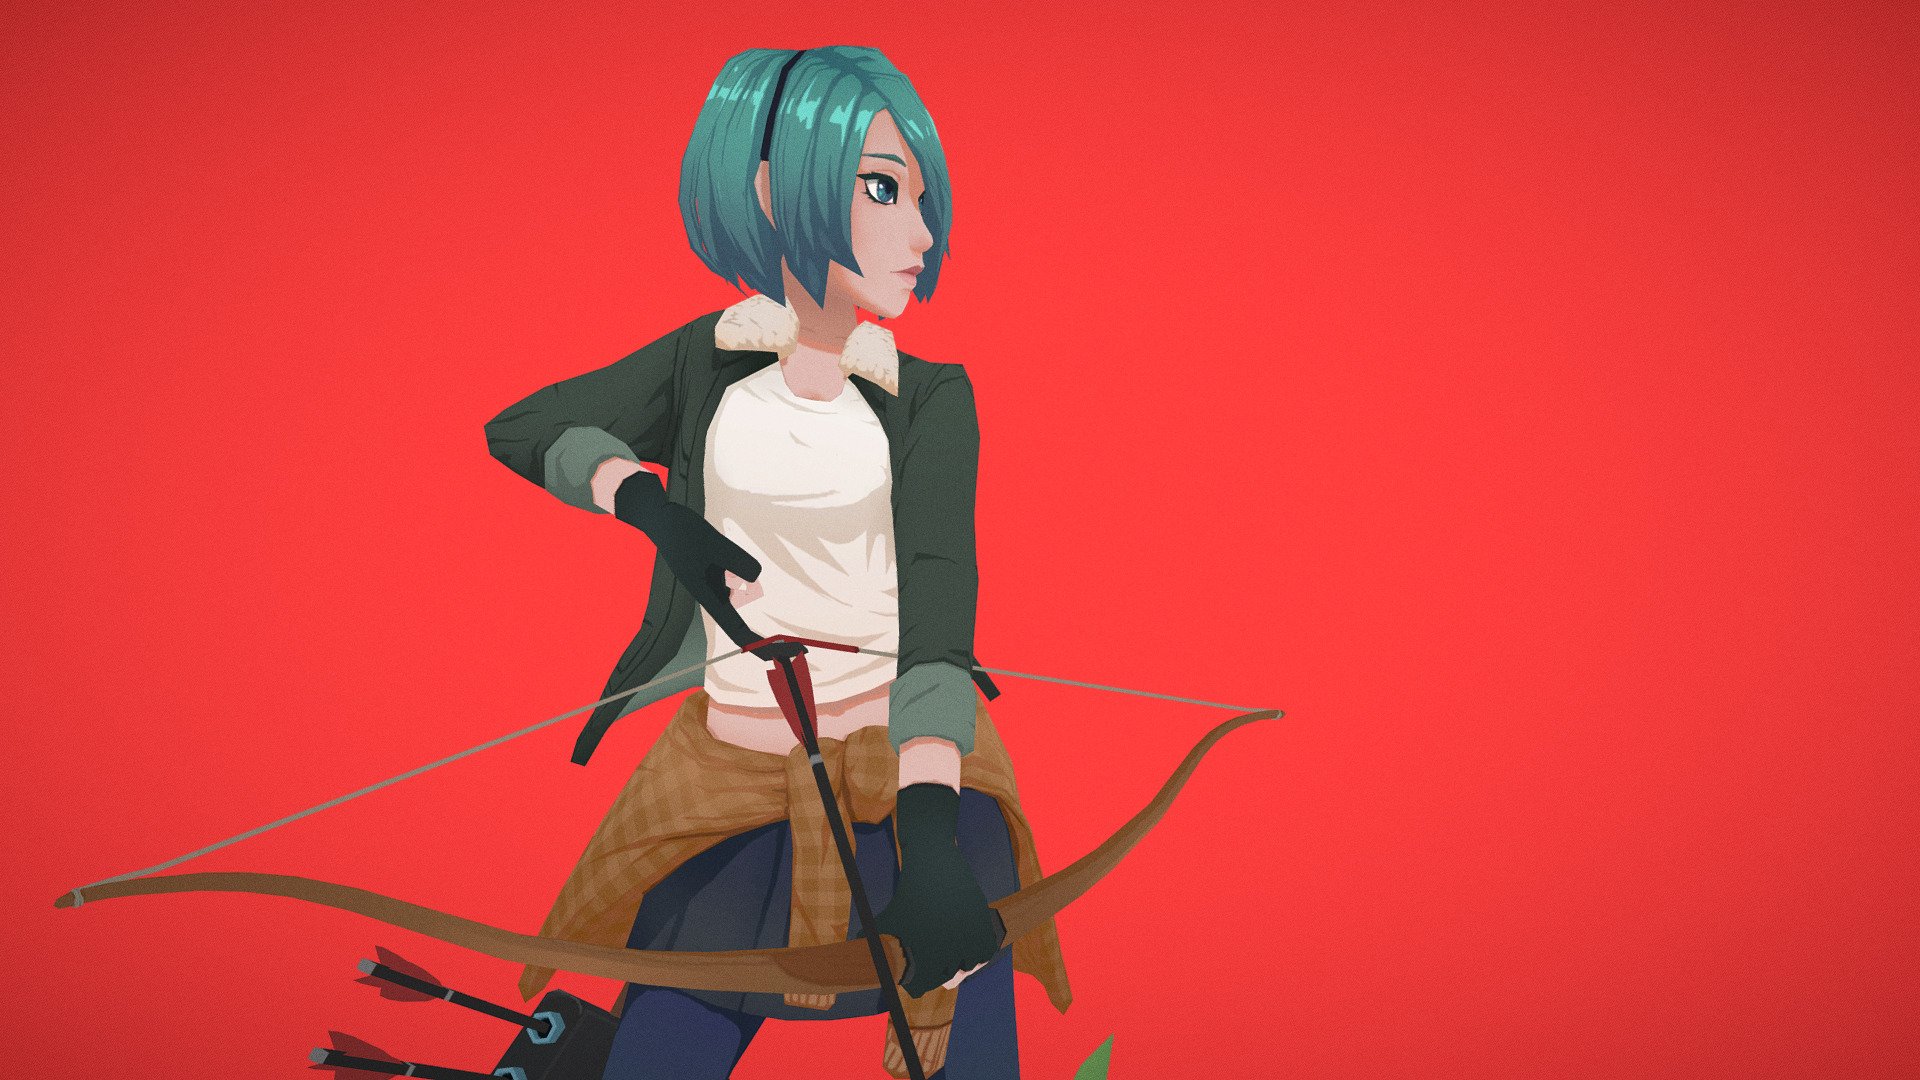 A fanmodel of Pectin's modern design of Setsuna from Fire Emblem Fates. https://twitter.com/Pectin_/status/1082396063779172352

My first game-ready character exclusively done in blender. I had some issues with exporting my rigs so no animations for this one 3d model